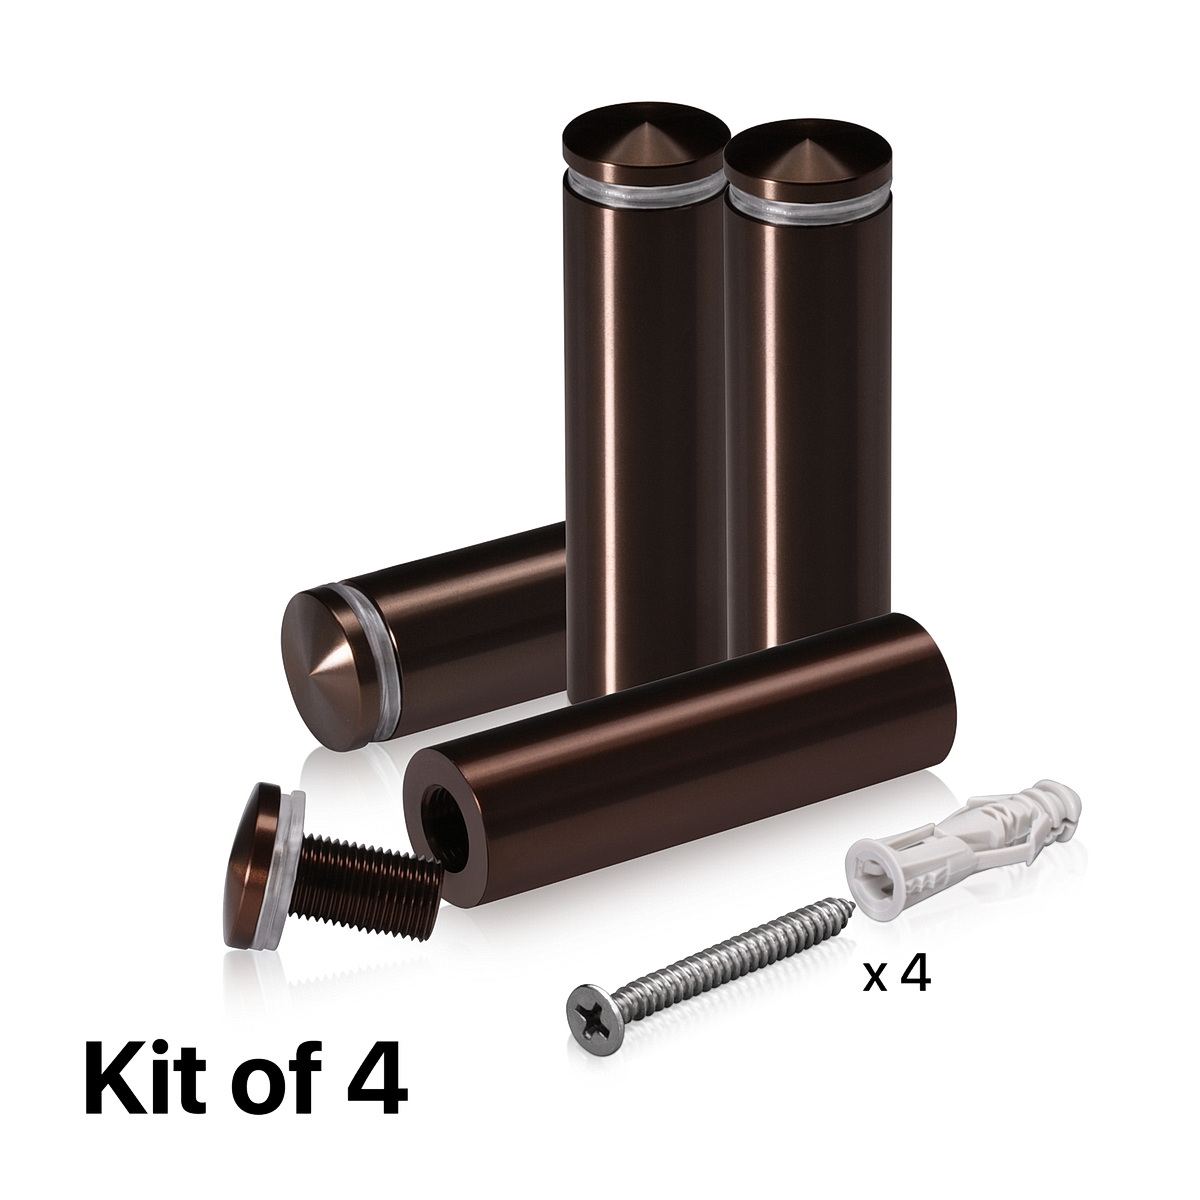 (Set of 4) 3/4'' Diameter X 2-1/2'' Barrel Length, Aluminum Rounded Head Standoffs, Bronze Anodized Finish Standoff with (4) 2216Z Screws and (4) LANC1 Anchors for concrete or drywall (For Inside / Outside use) [Required Material Hole Size: 7/16'']